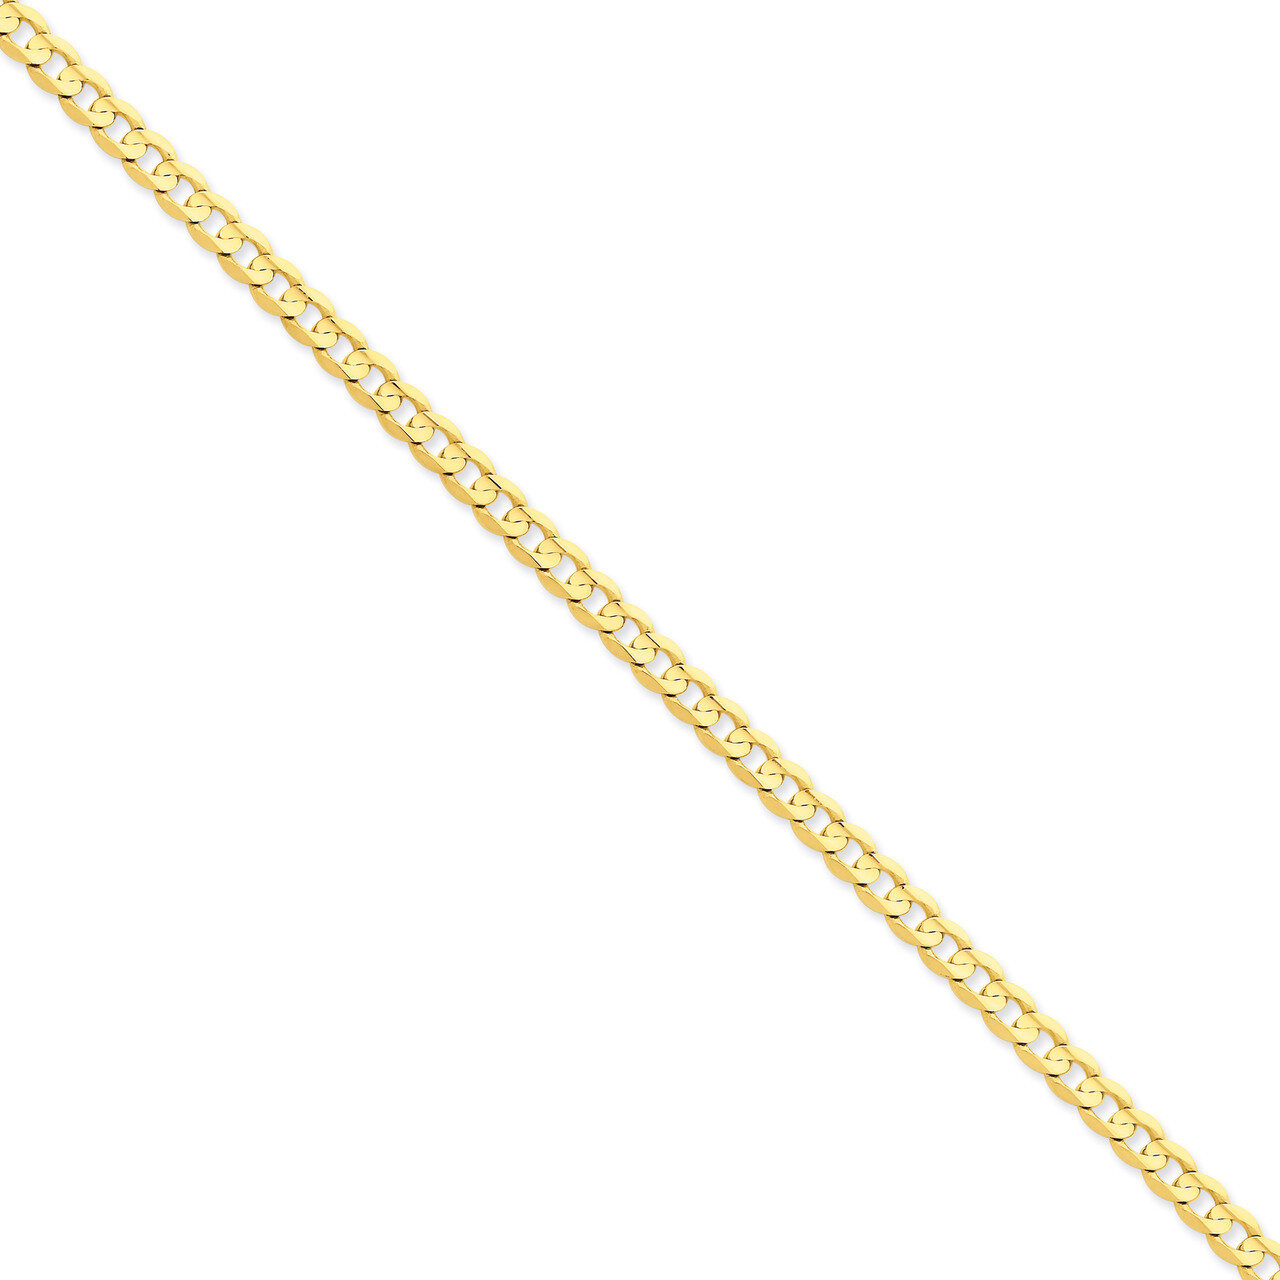 5.25mm Open Concave Curb Chain 24 Inch 14k Gold LCR140-24